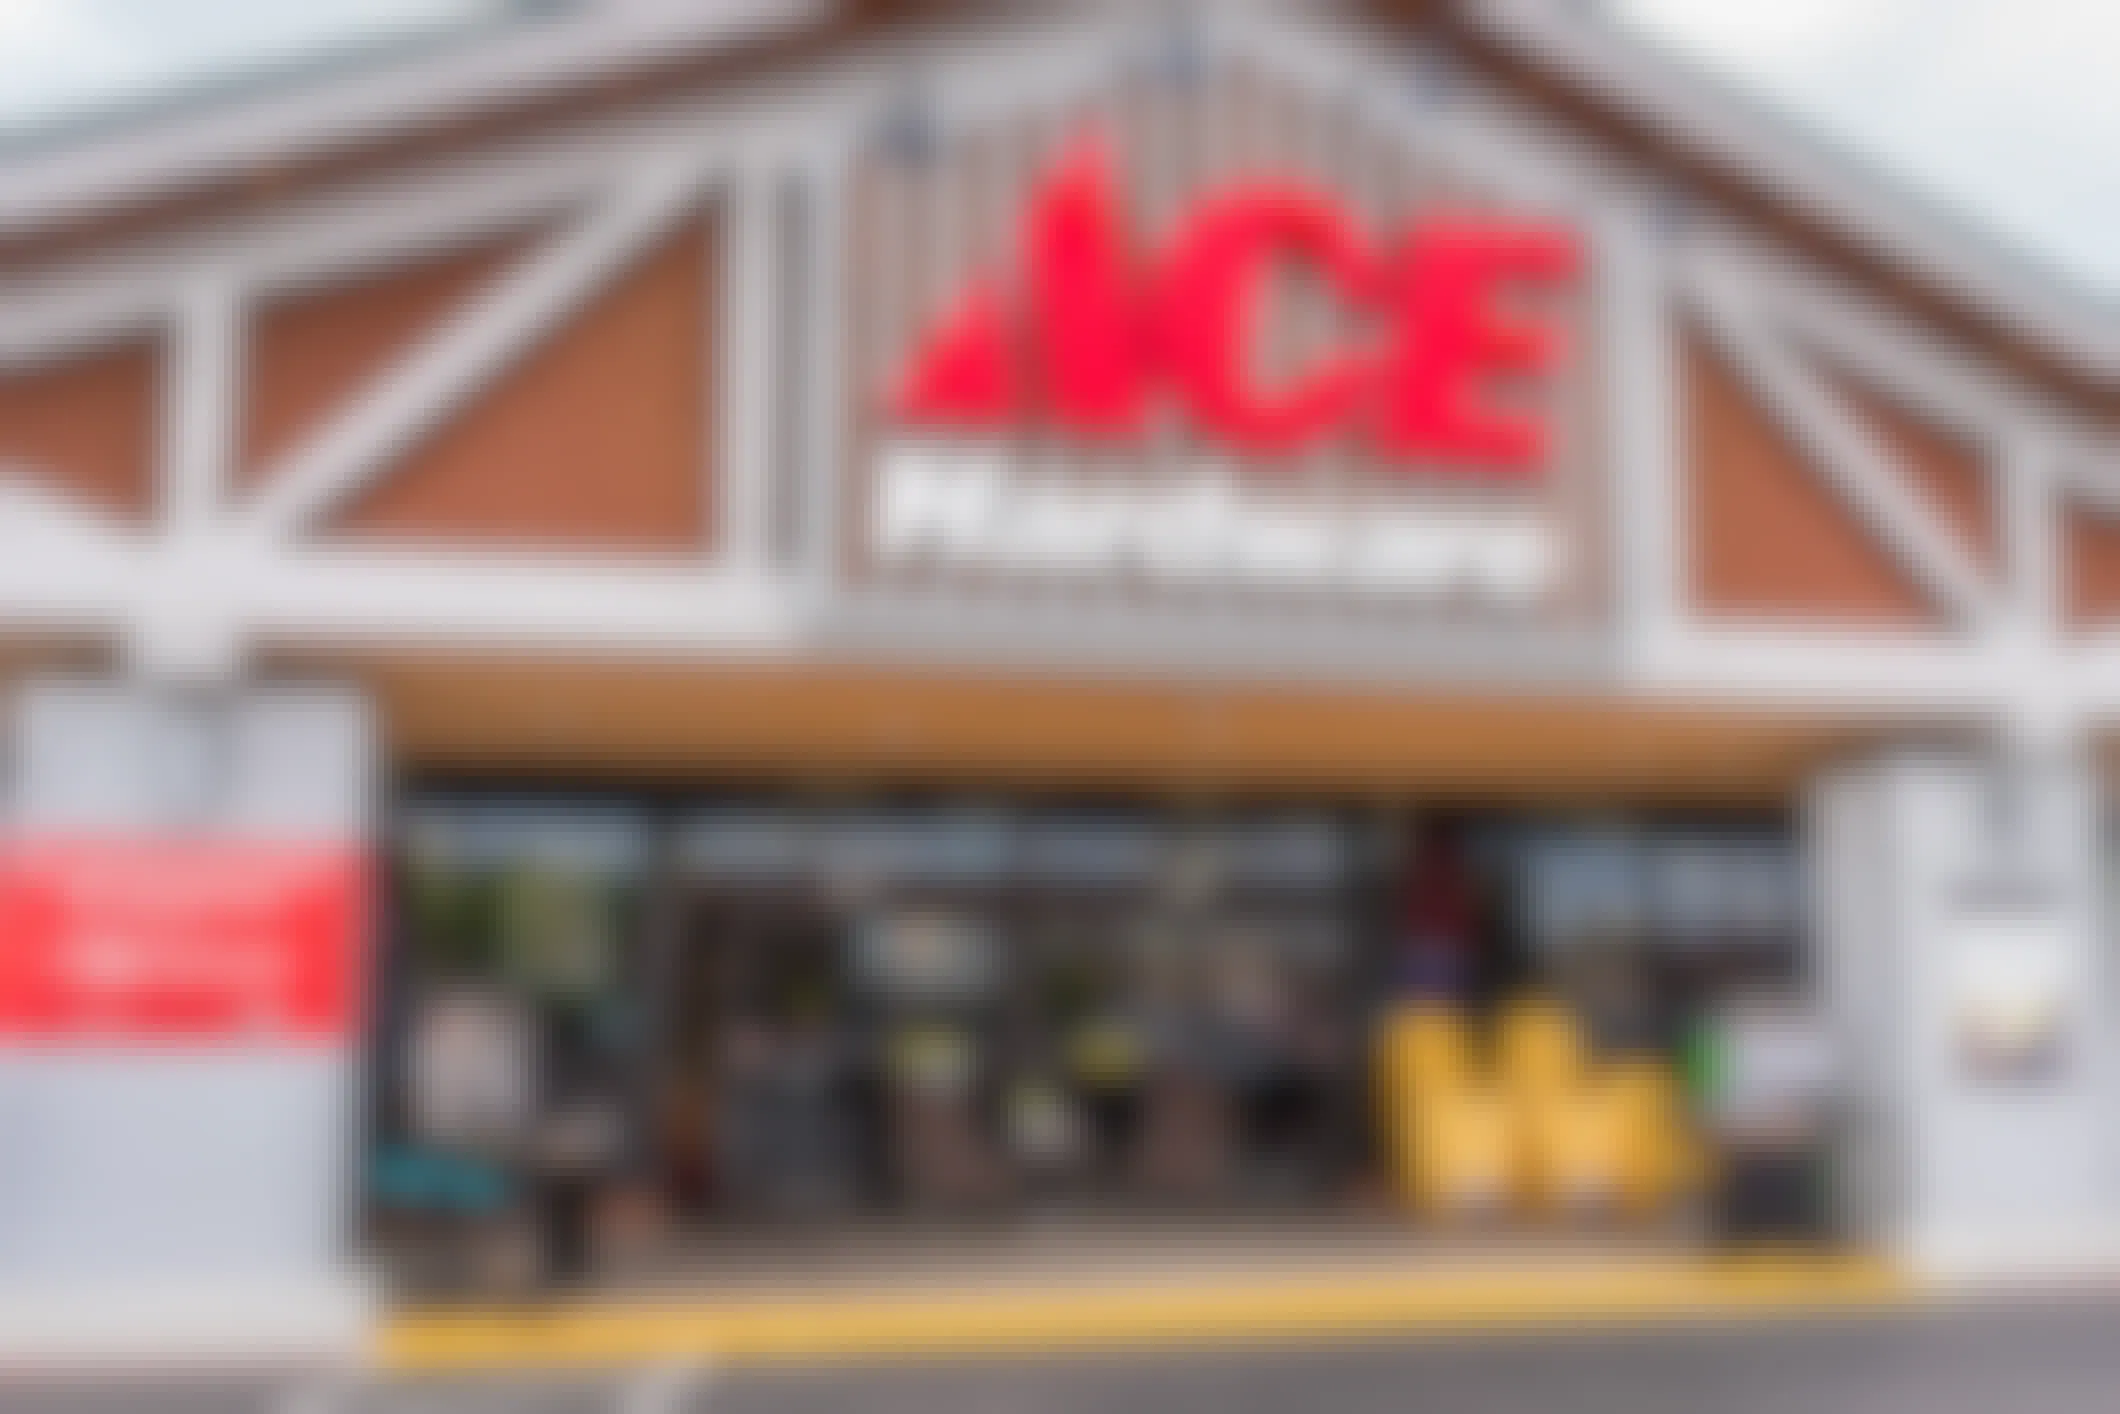 Outside of an Ace hardware store